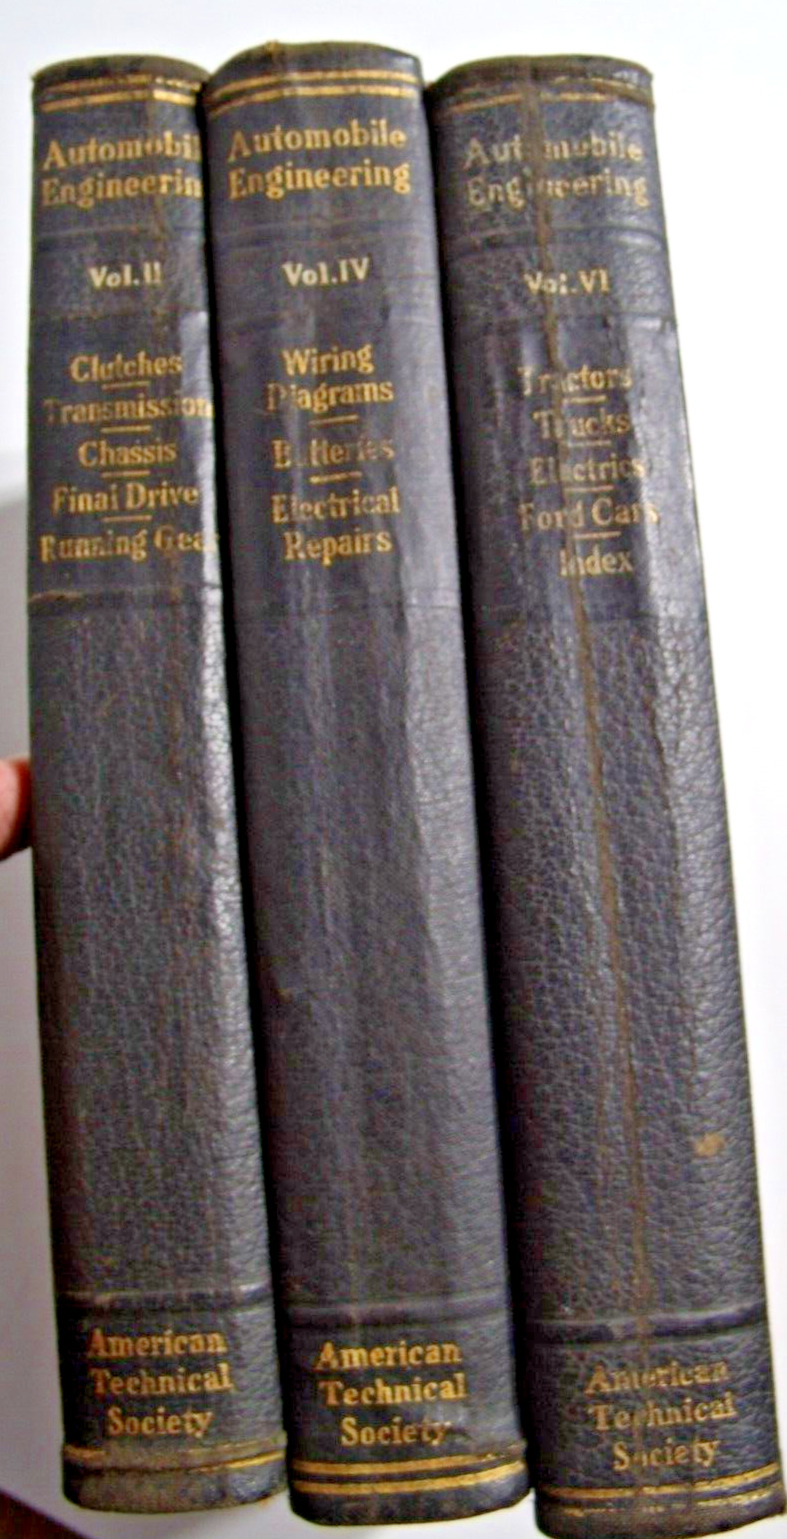 1924 Automobile Engineering, 3 Volumes (2, 4, 6), American Technical Society